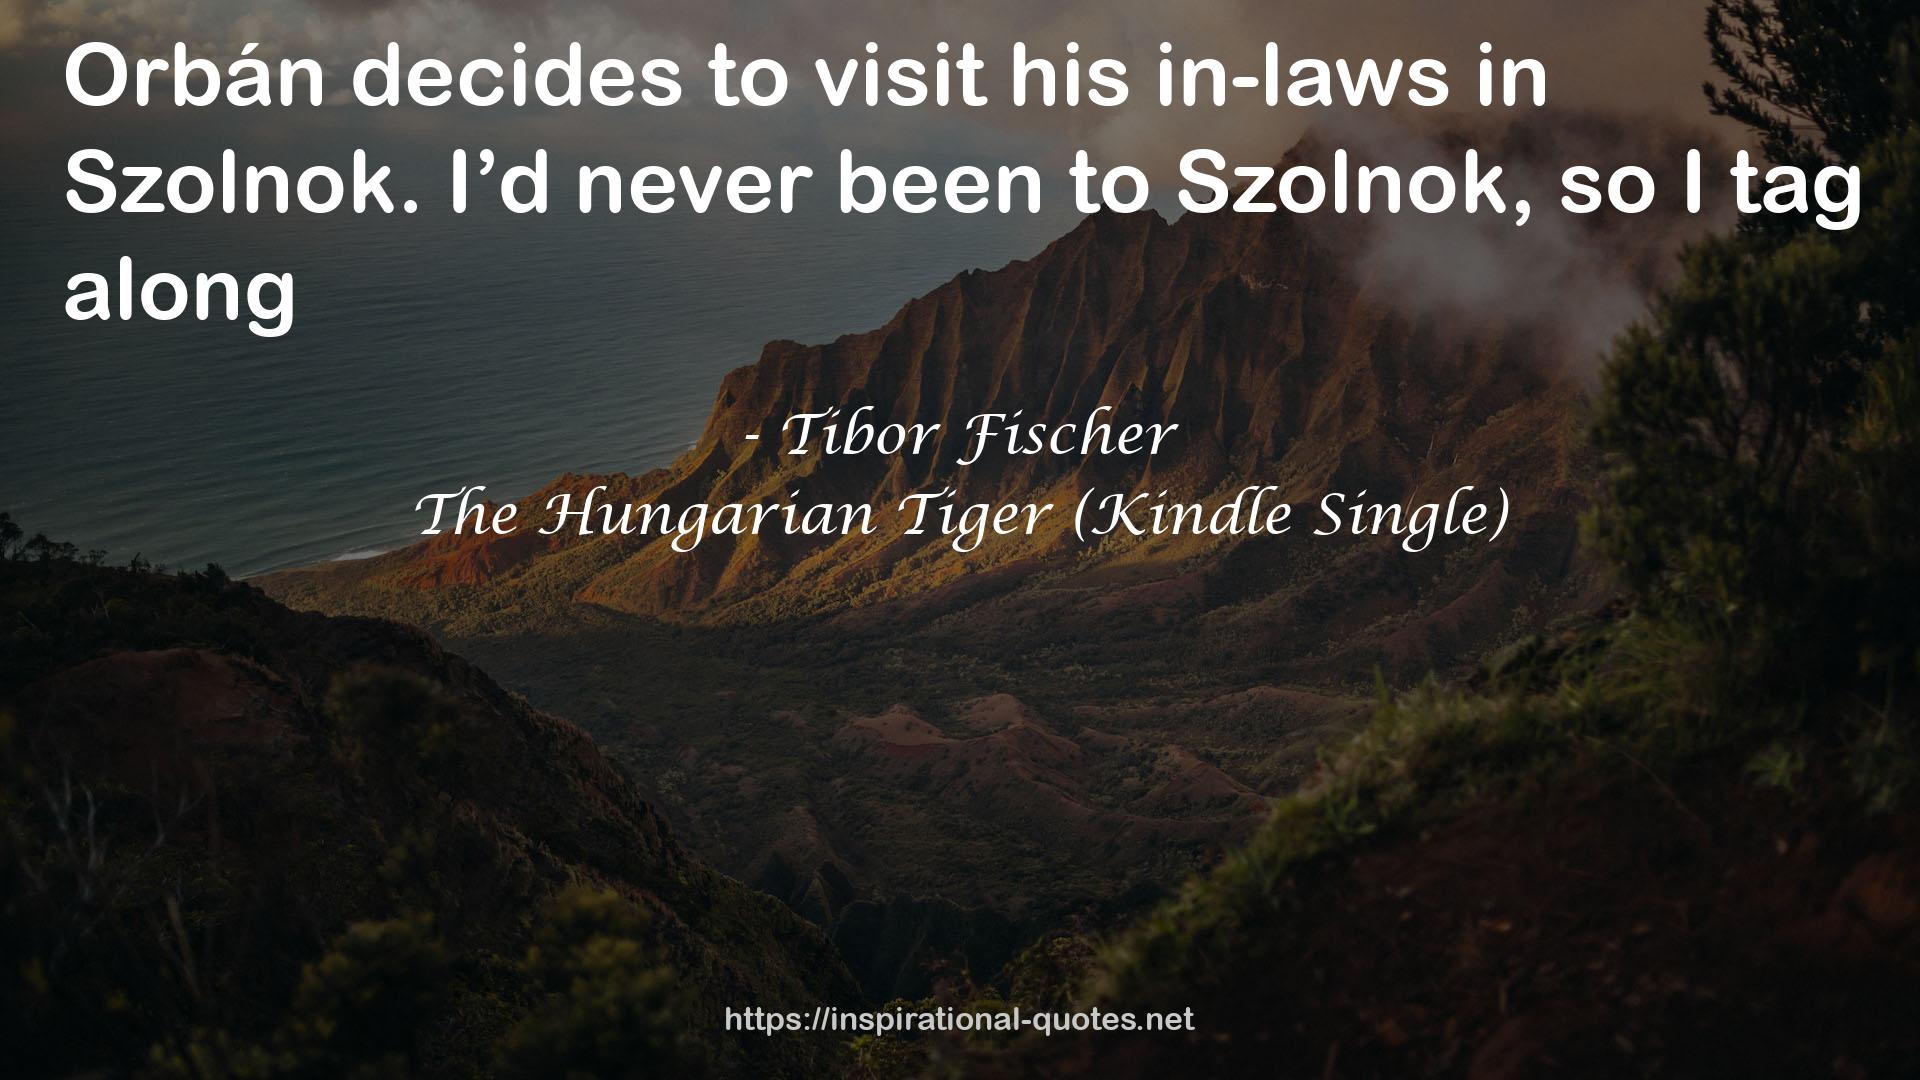 The Hungarian Tiger (Kindle Single) QUOTES